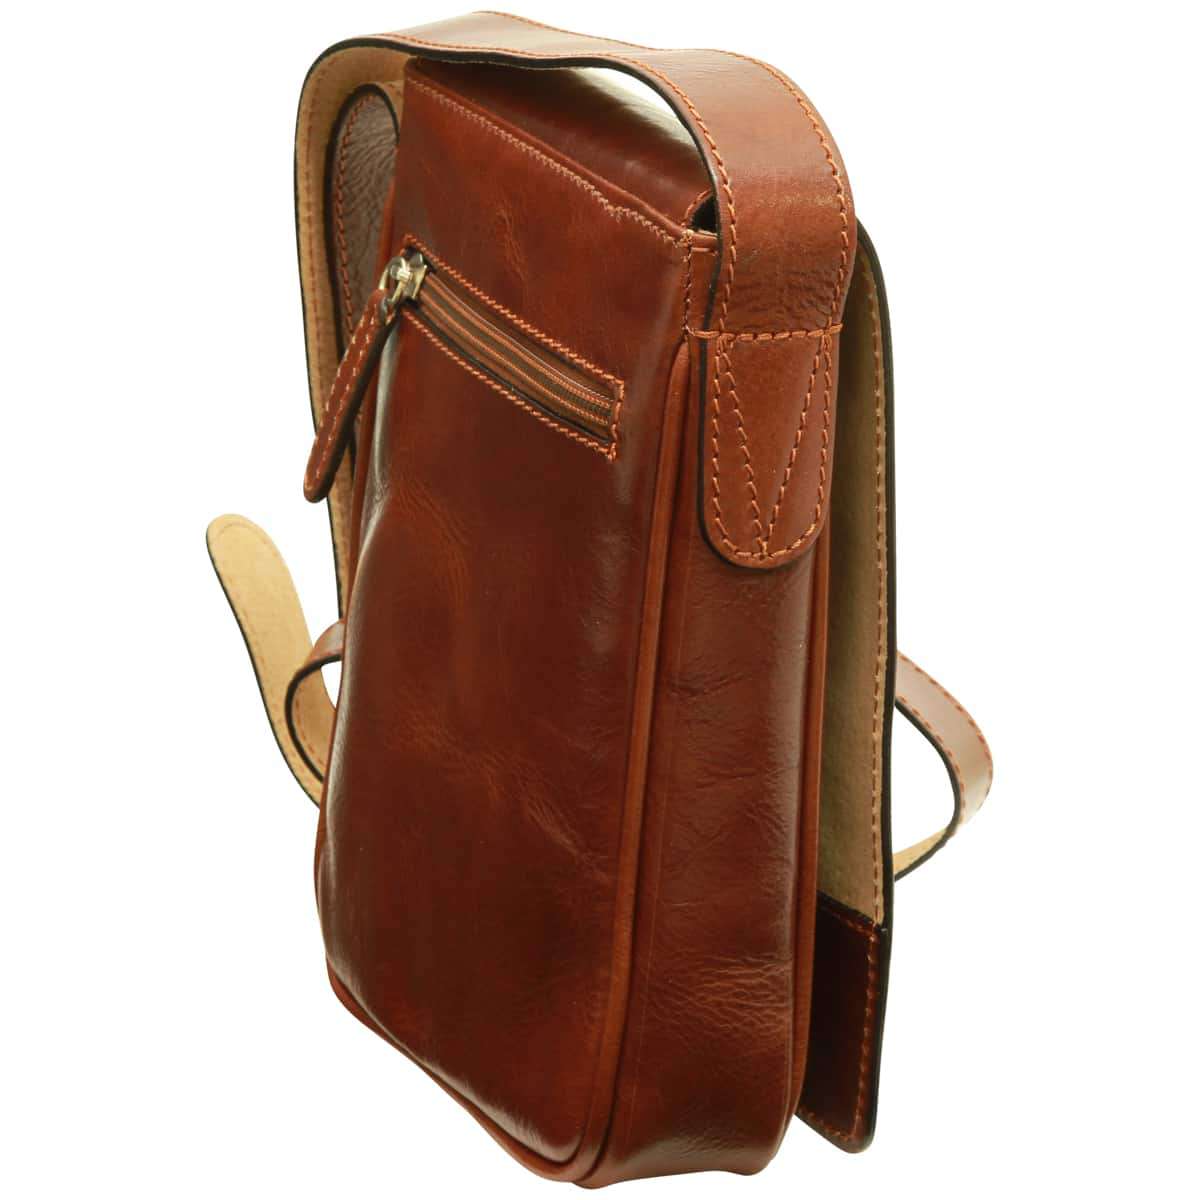 Cowhide leather cross body bag - Brown | 070805MA US | Old Angler Firenze